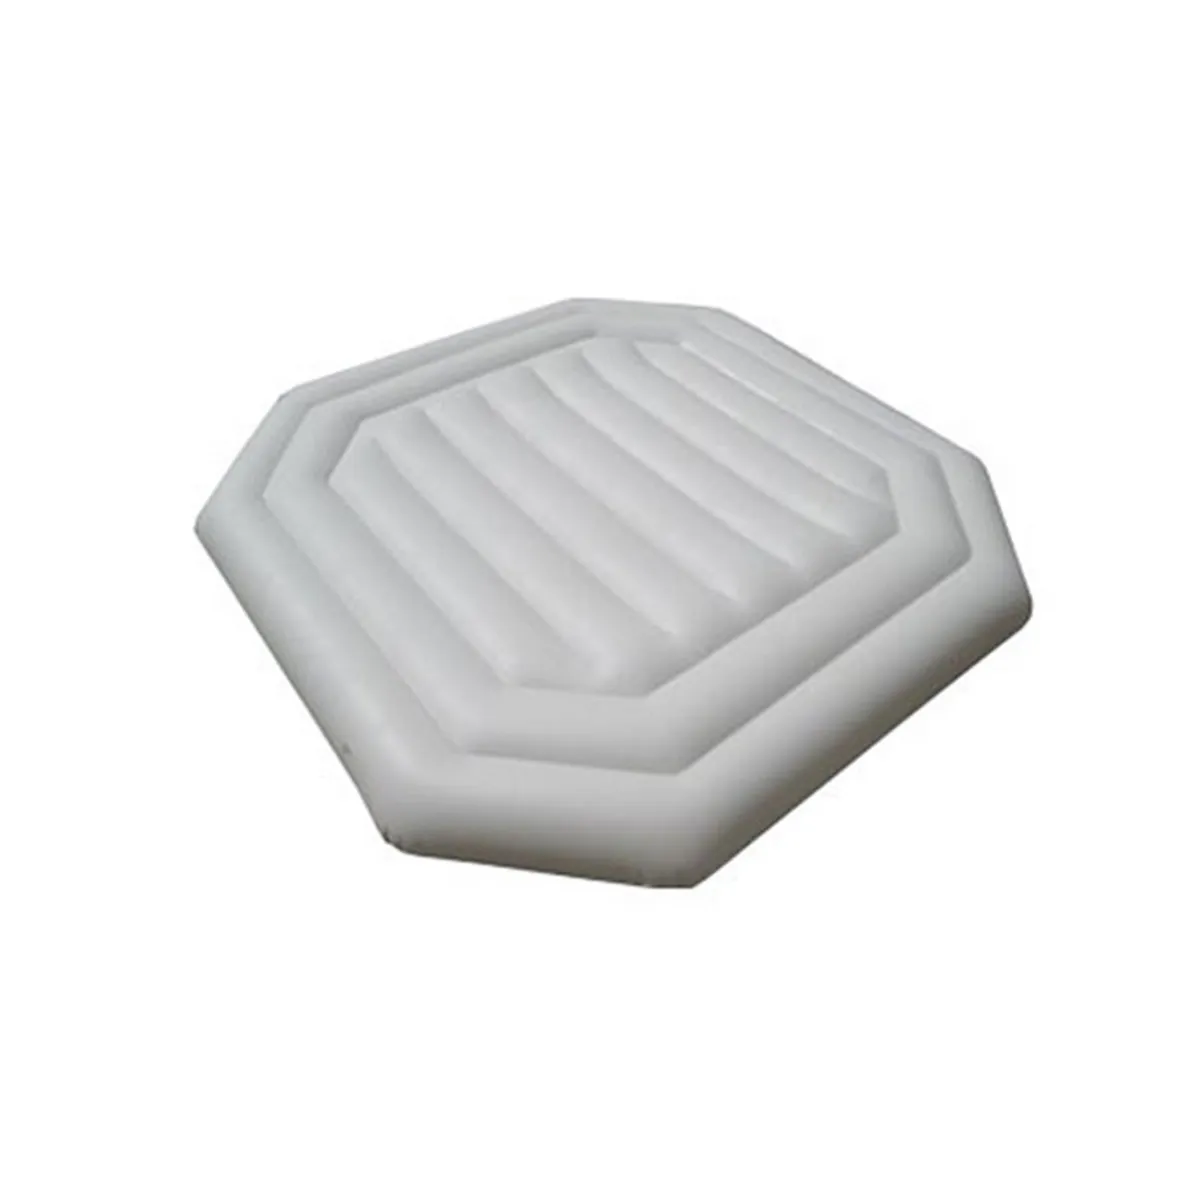 COUVERTURE SPA GONFLABLE INTEX OCTO 4 PLACES - 11884